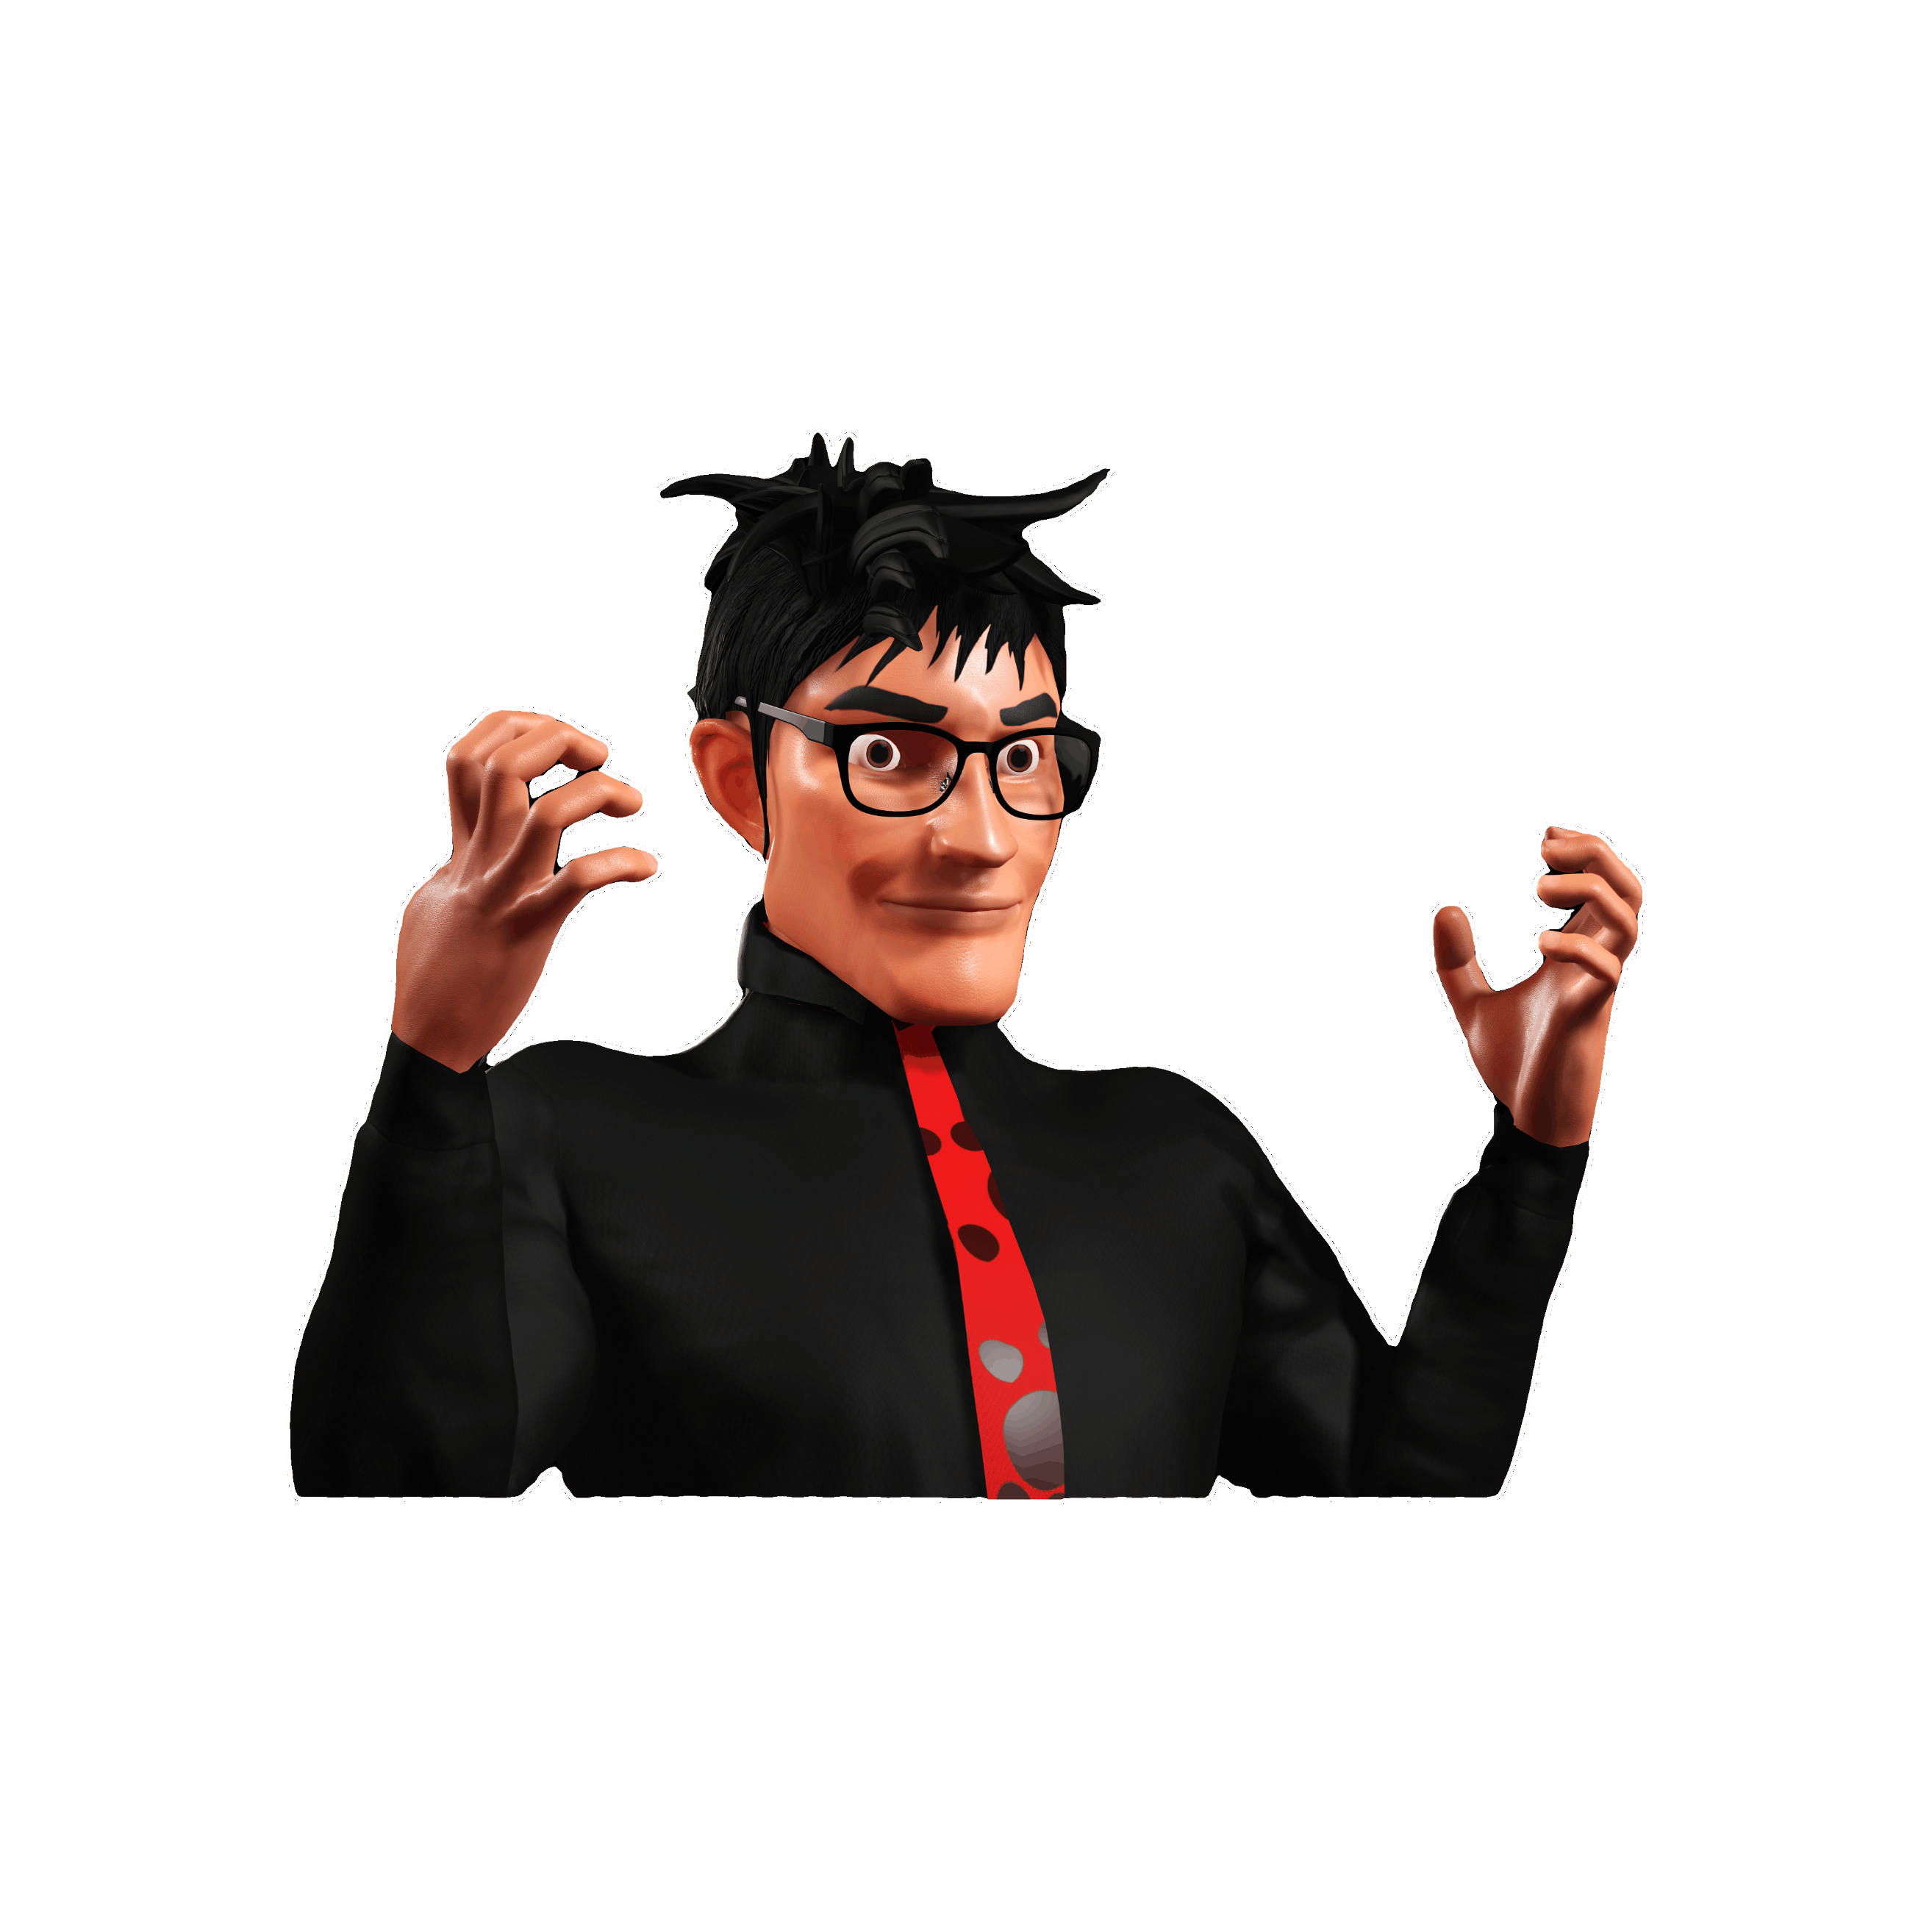 3D TOON character Dylan, created by me in a black shirt, red tie, and glasses in an animated gif image.